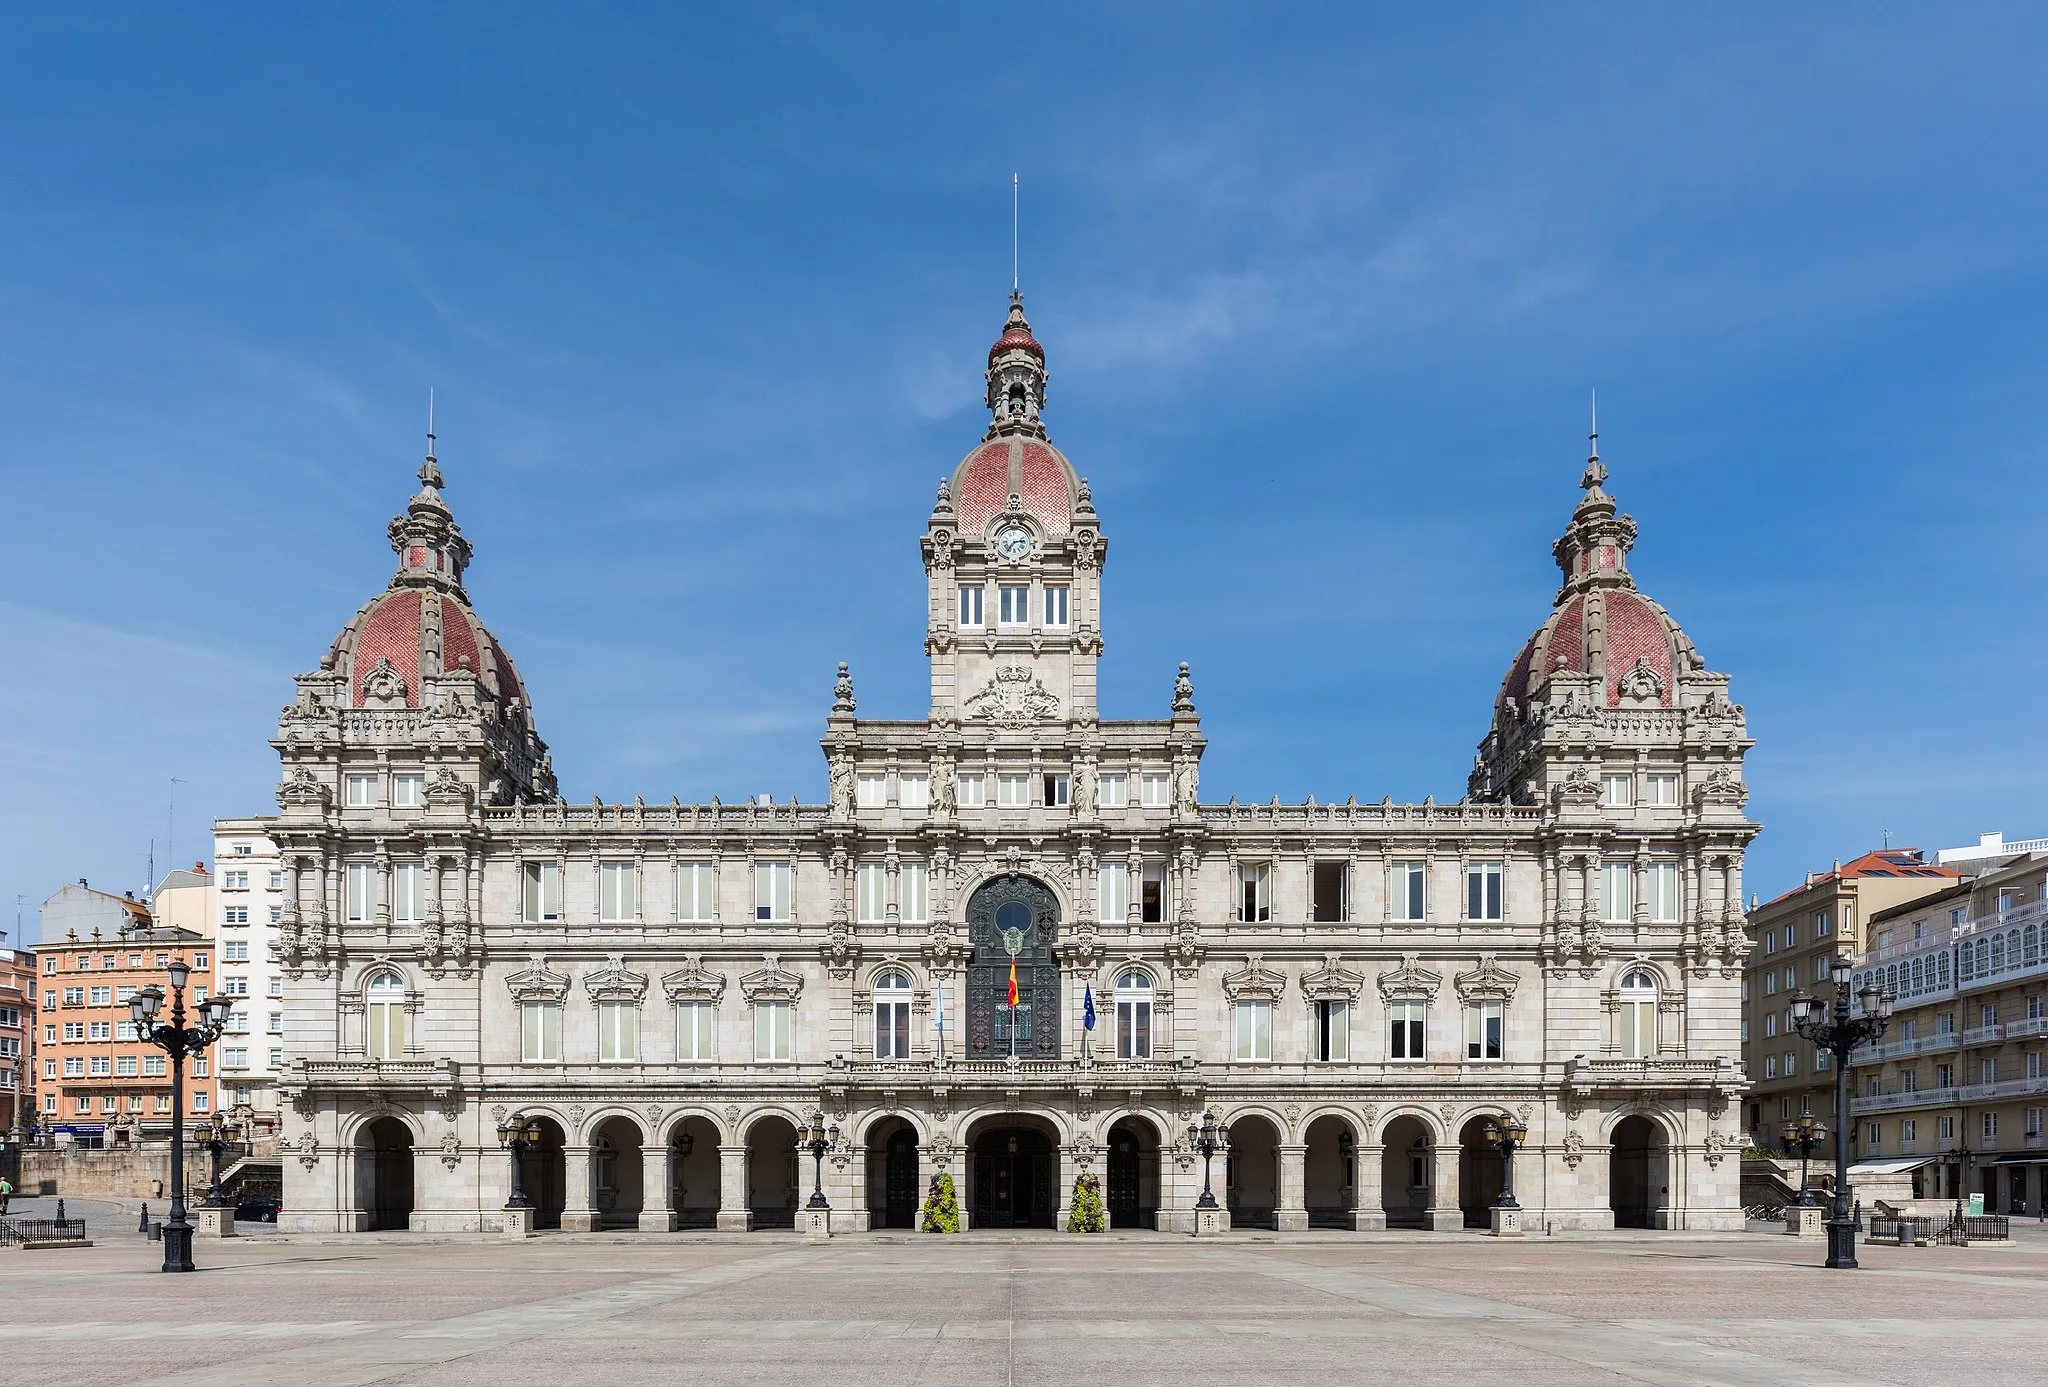 Photo showing: Front view of the City Hall, also called the Municipal Palace, of A Coruña in Galicia, Spain, during the blue hour. The modernist building is located in the María Pita Square in the center of the city and was built between 1908 and 1912 following a design of Pedro Ramiro Mariño. It was inaugurated in 1927 by king Alfonso XIII. The facade is 64 metres (210 ft) wide and has 43 windows. The ground area of the building is 2,300 m2 (24,757.0 sq ft). The four statues on the third floor represent the four provinces of Galicia — A Coruña, Lugo, Orense and Pontevedra. Over them, in the middle, is the coat of arms of the city. The two dames flanking it symbolize Peace & Industry and Work & Wisdom. The tower in the middle accommodates the clock and the bells, which are made of bronze and tin and weigh 1,600 kilograms (3,527 lb).